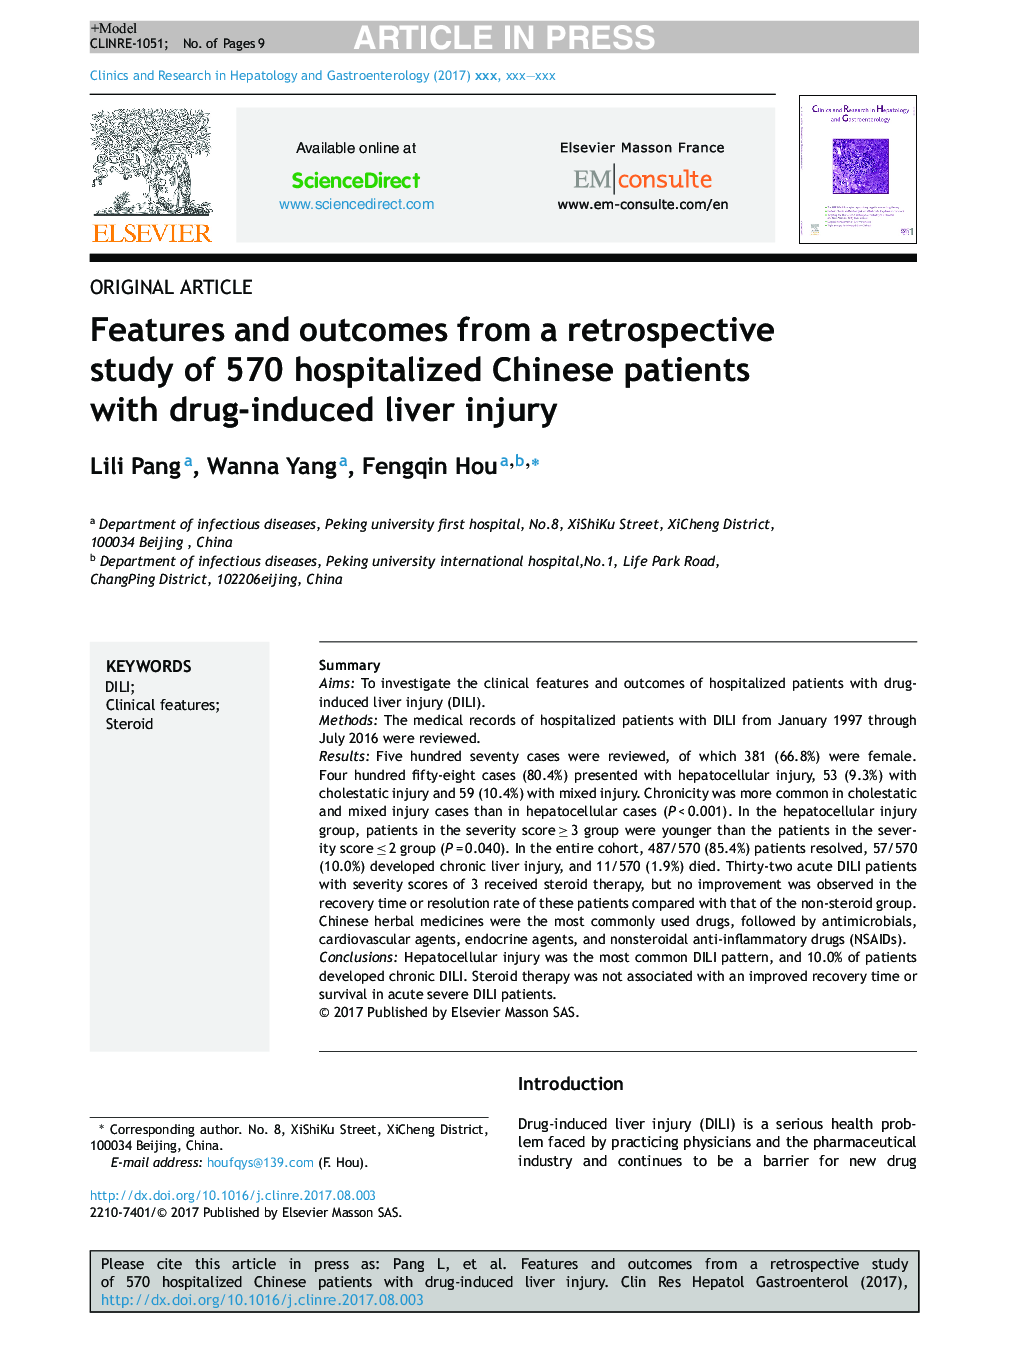 Features and outcomes from a retrospective study of 570Â hospitalized Chinese patients with drug-induced liver injury